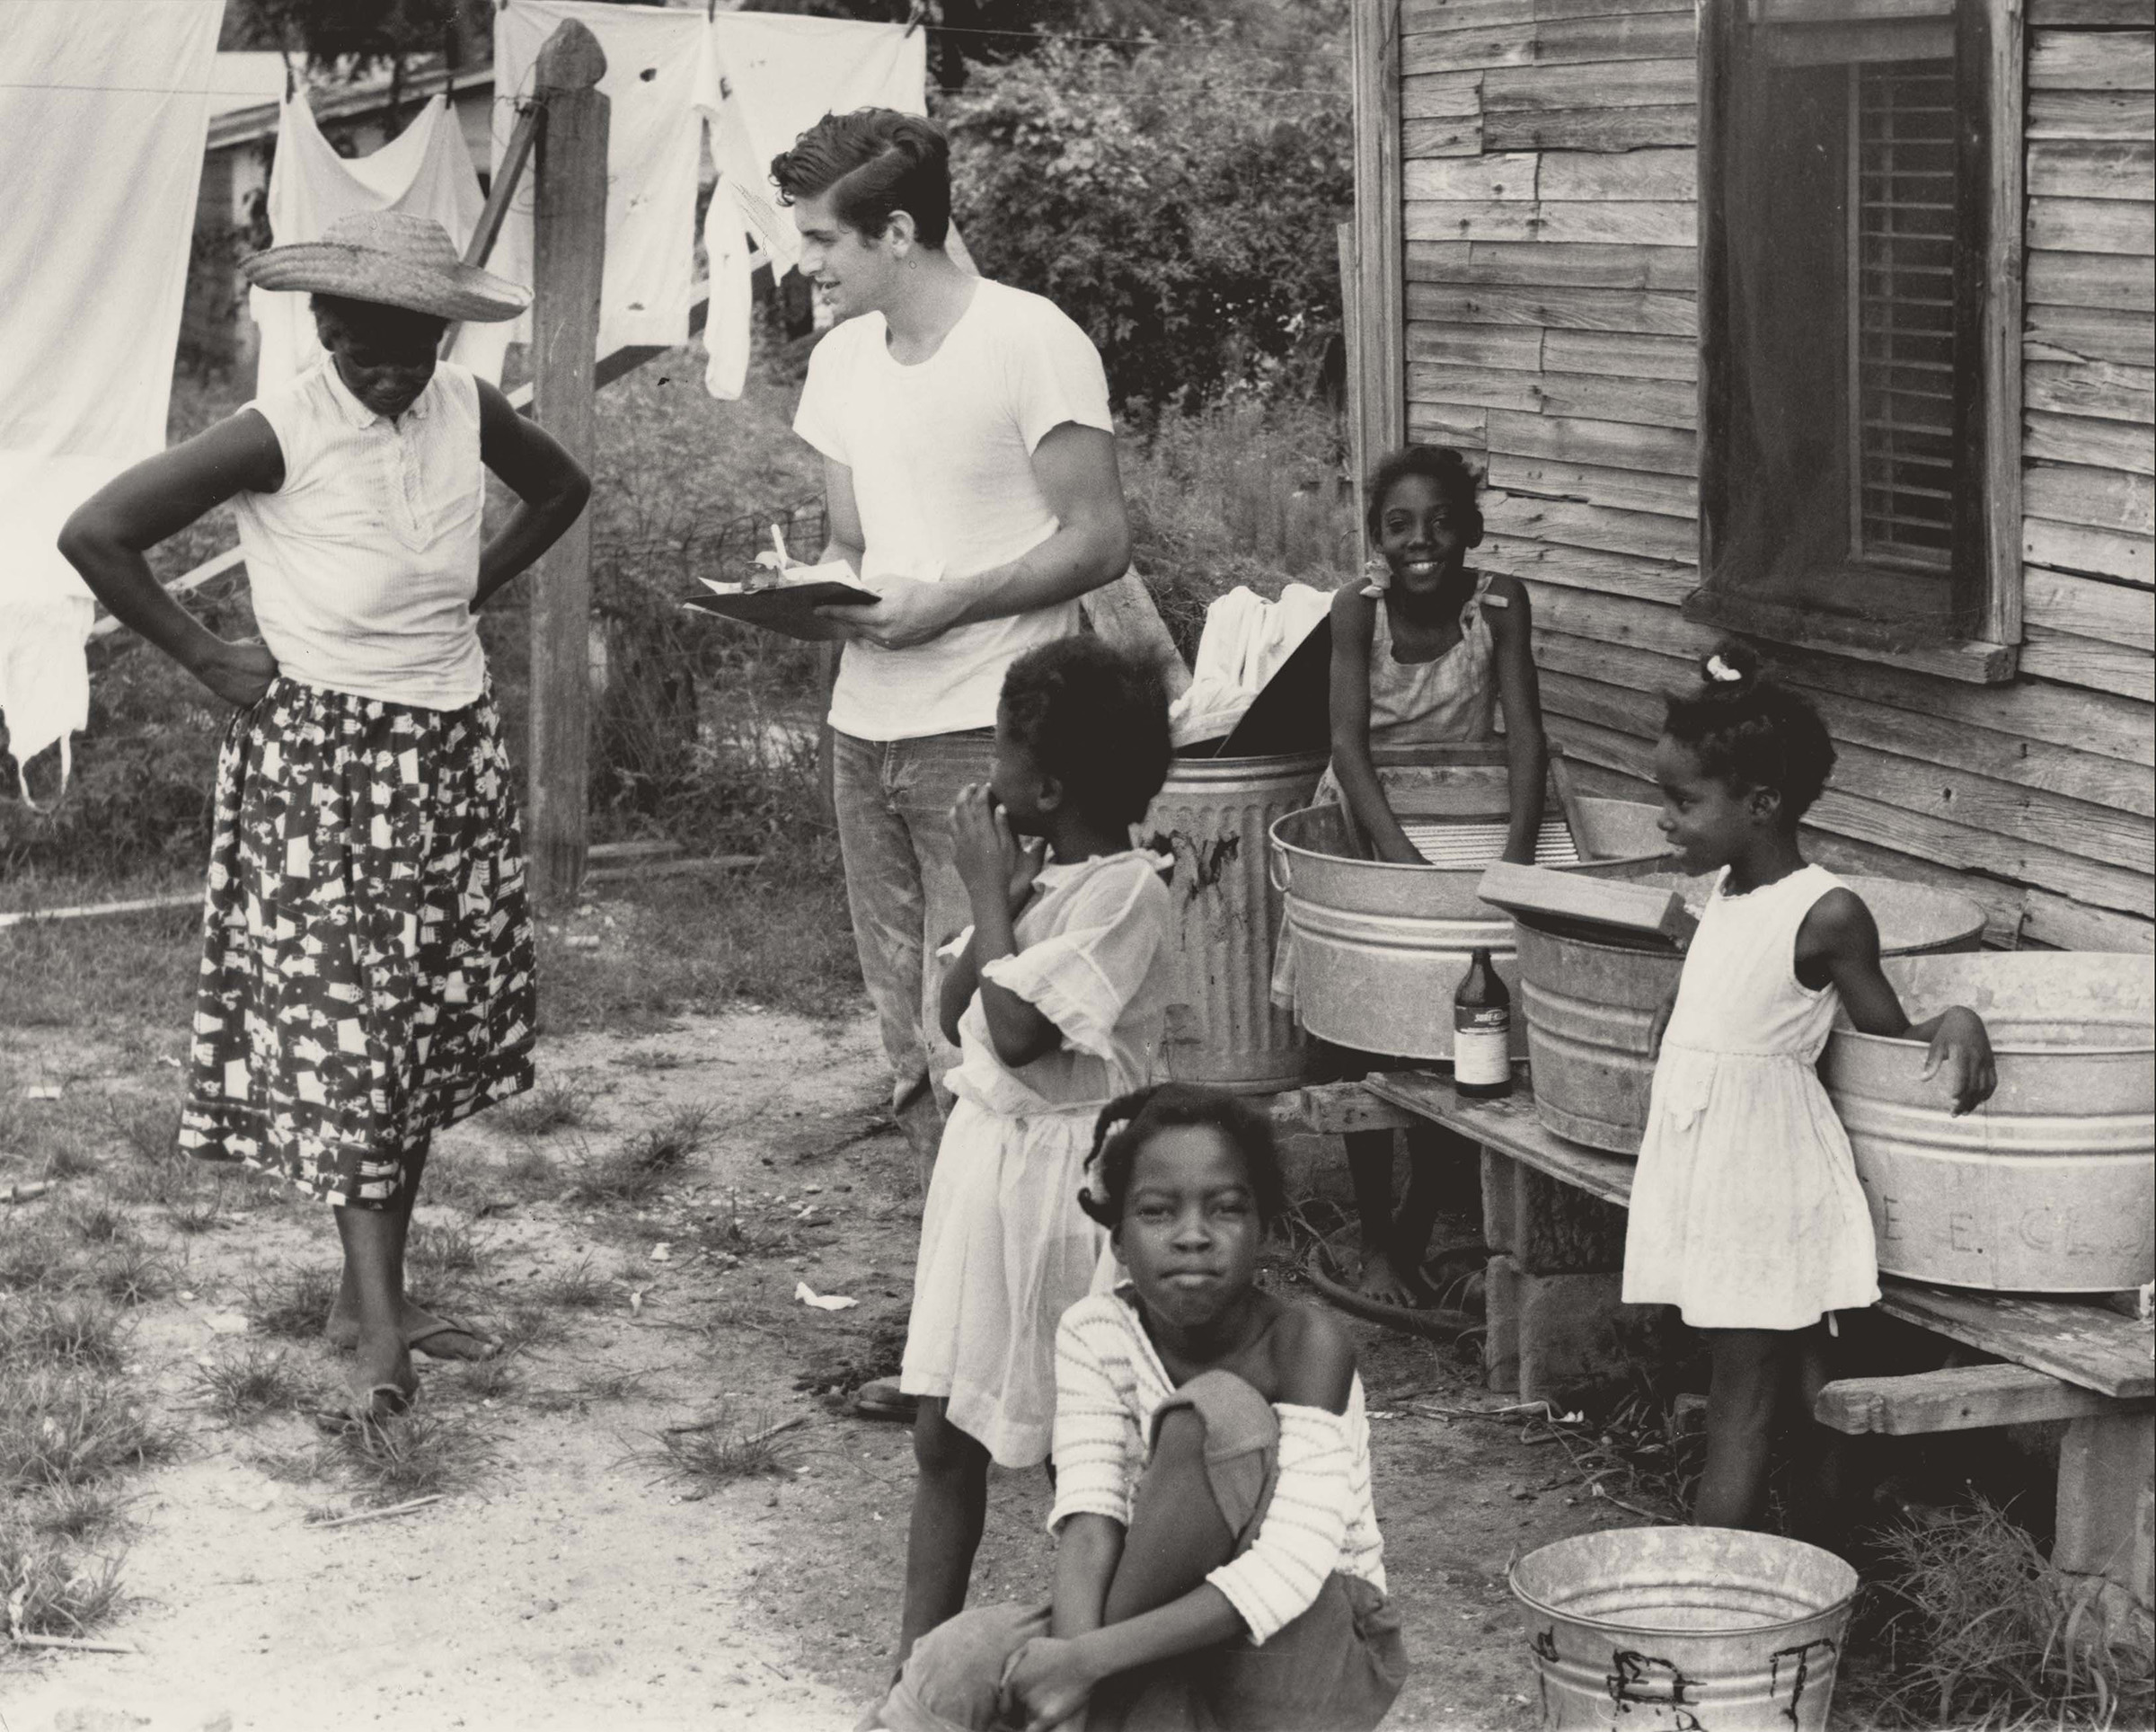 Voter Registration, July 1964. Photograph by Herbert Randall. Volunteer Dick Landerman discusses voter registration procedures with local resident Hattie Mae Pough at her home. The child in the foreground is Trudie Sloan, who lived next door; the other three children are Mrs. Pough's. M351 Herbert Randall Freedom Summer Photographs, Historical Manuscripts, The University of Southern Mississippi.